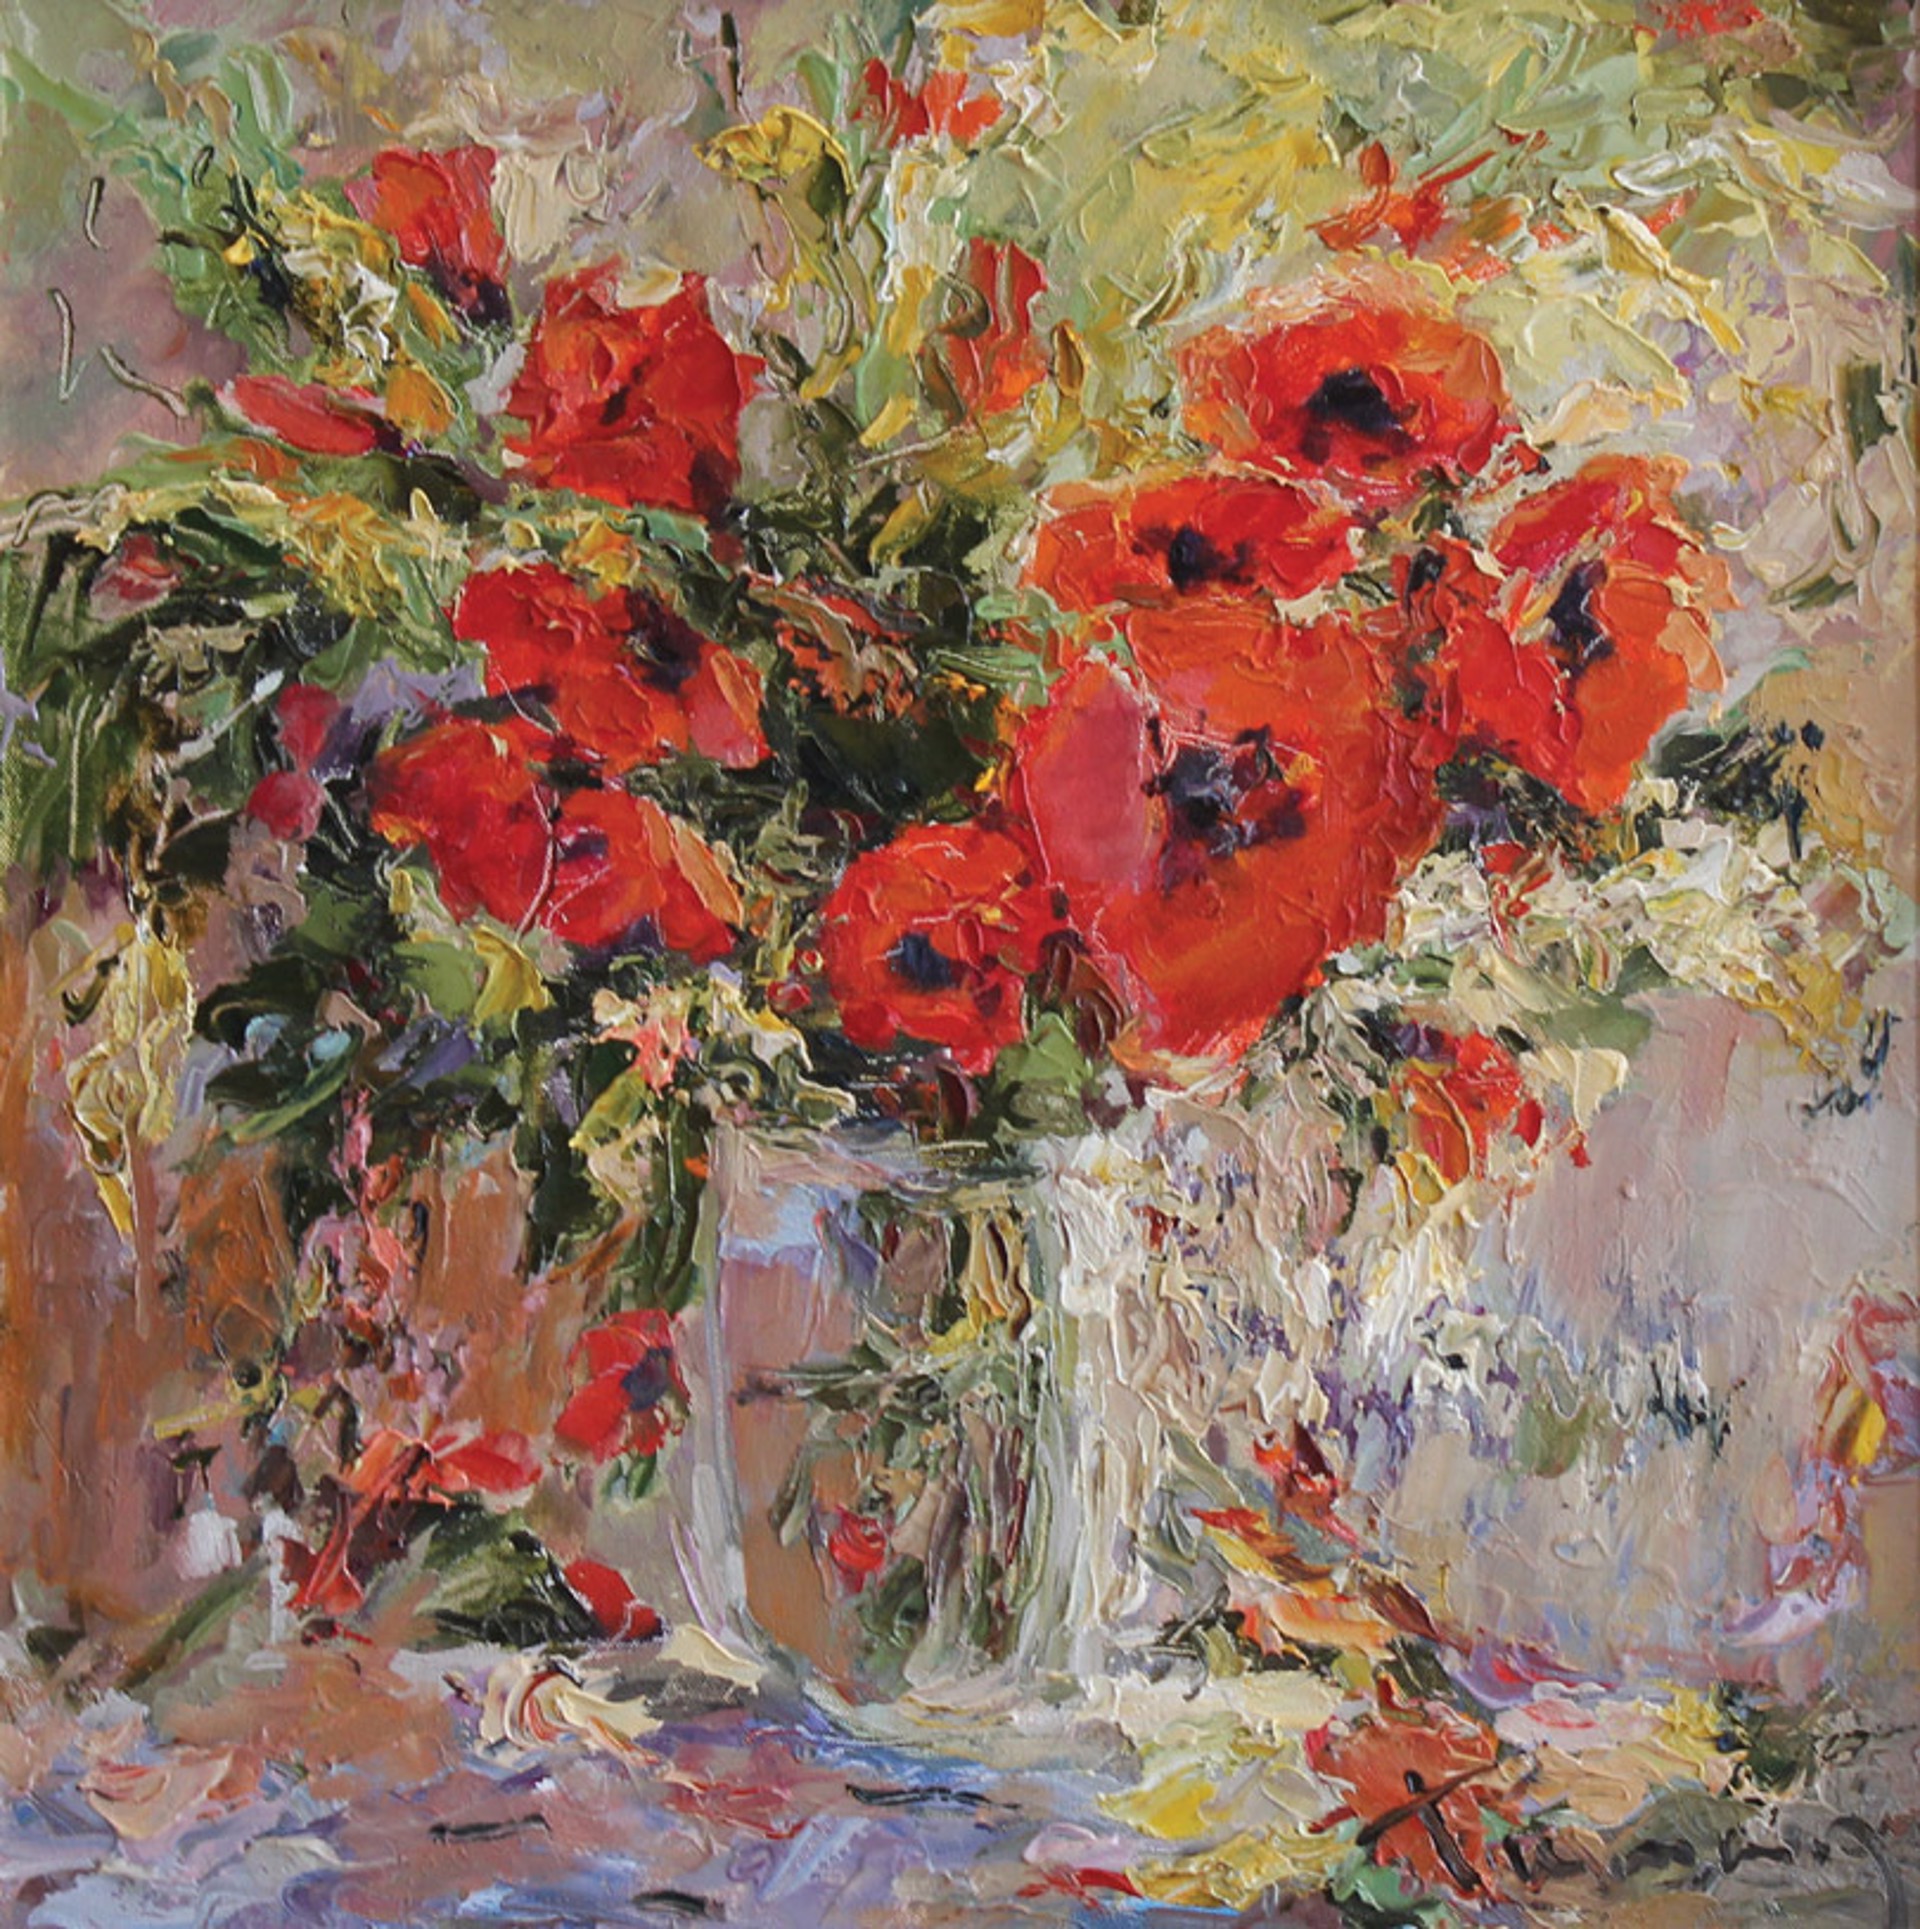 Red Poppies by Tuman Zhumabaev